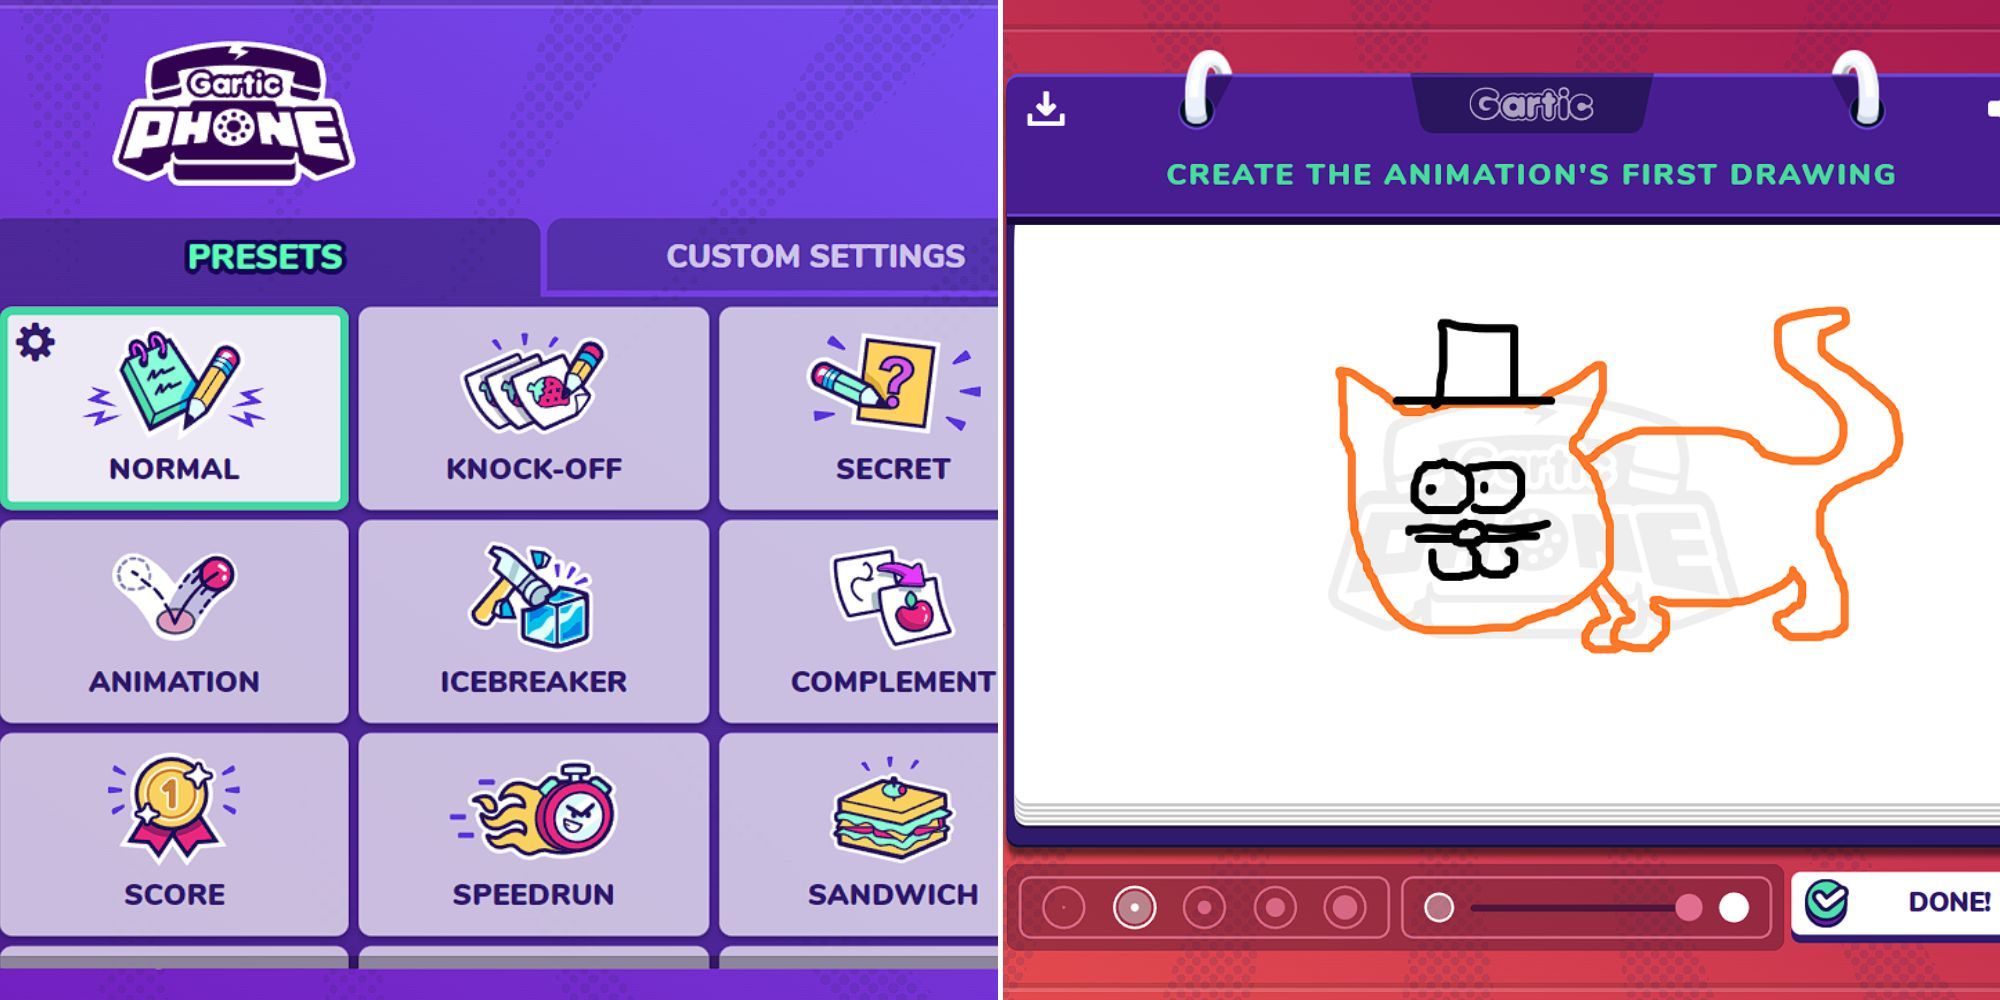 The Gartic Phone Presets Menu And A Player Drawing A Cat